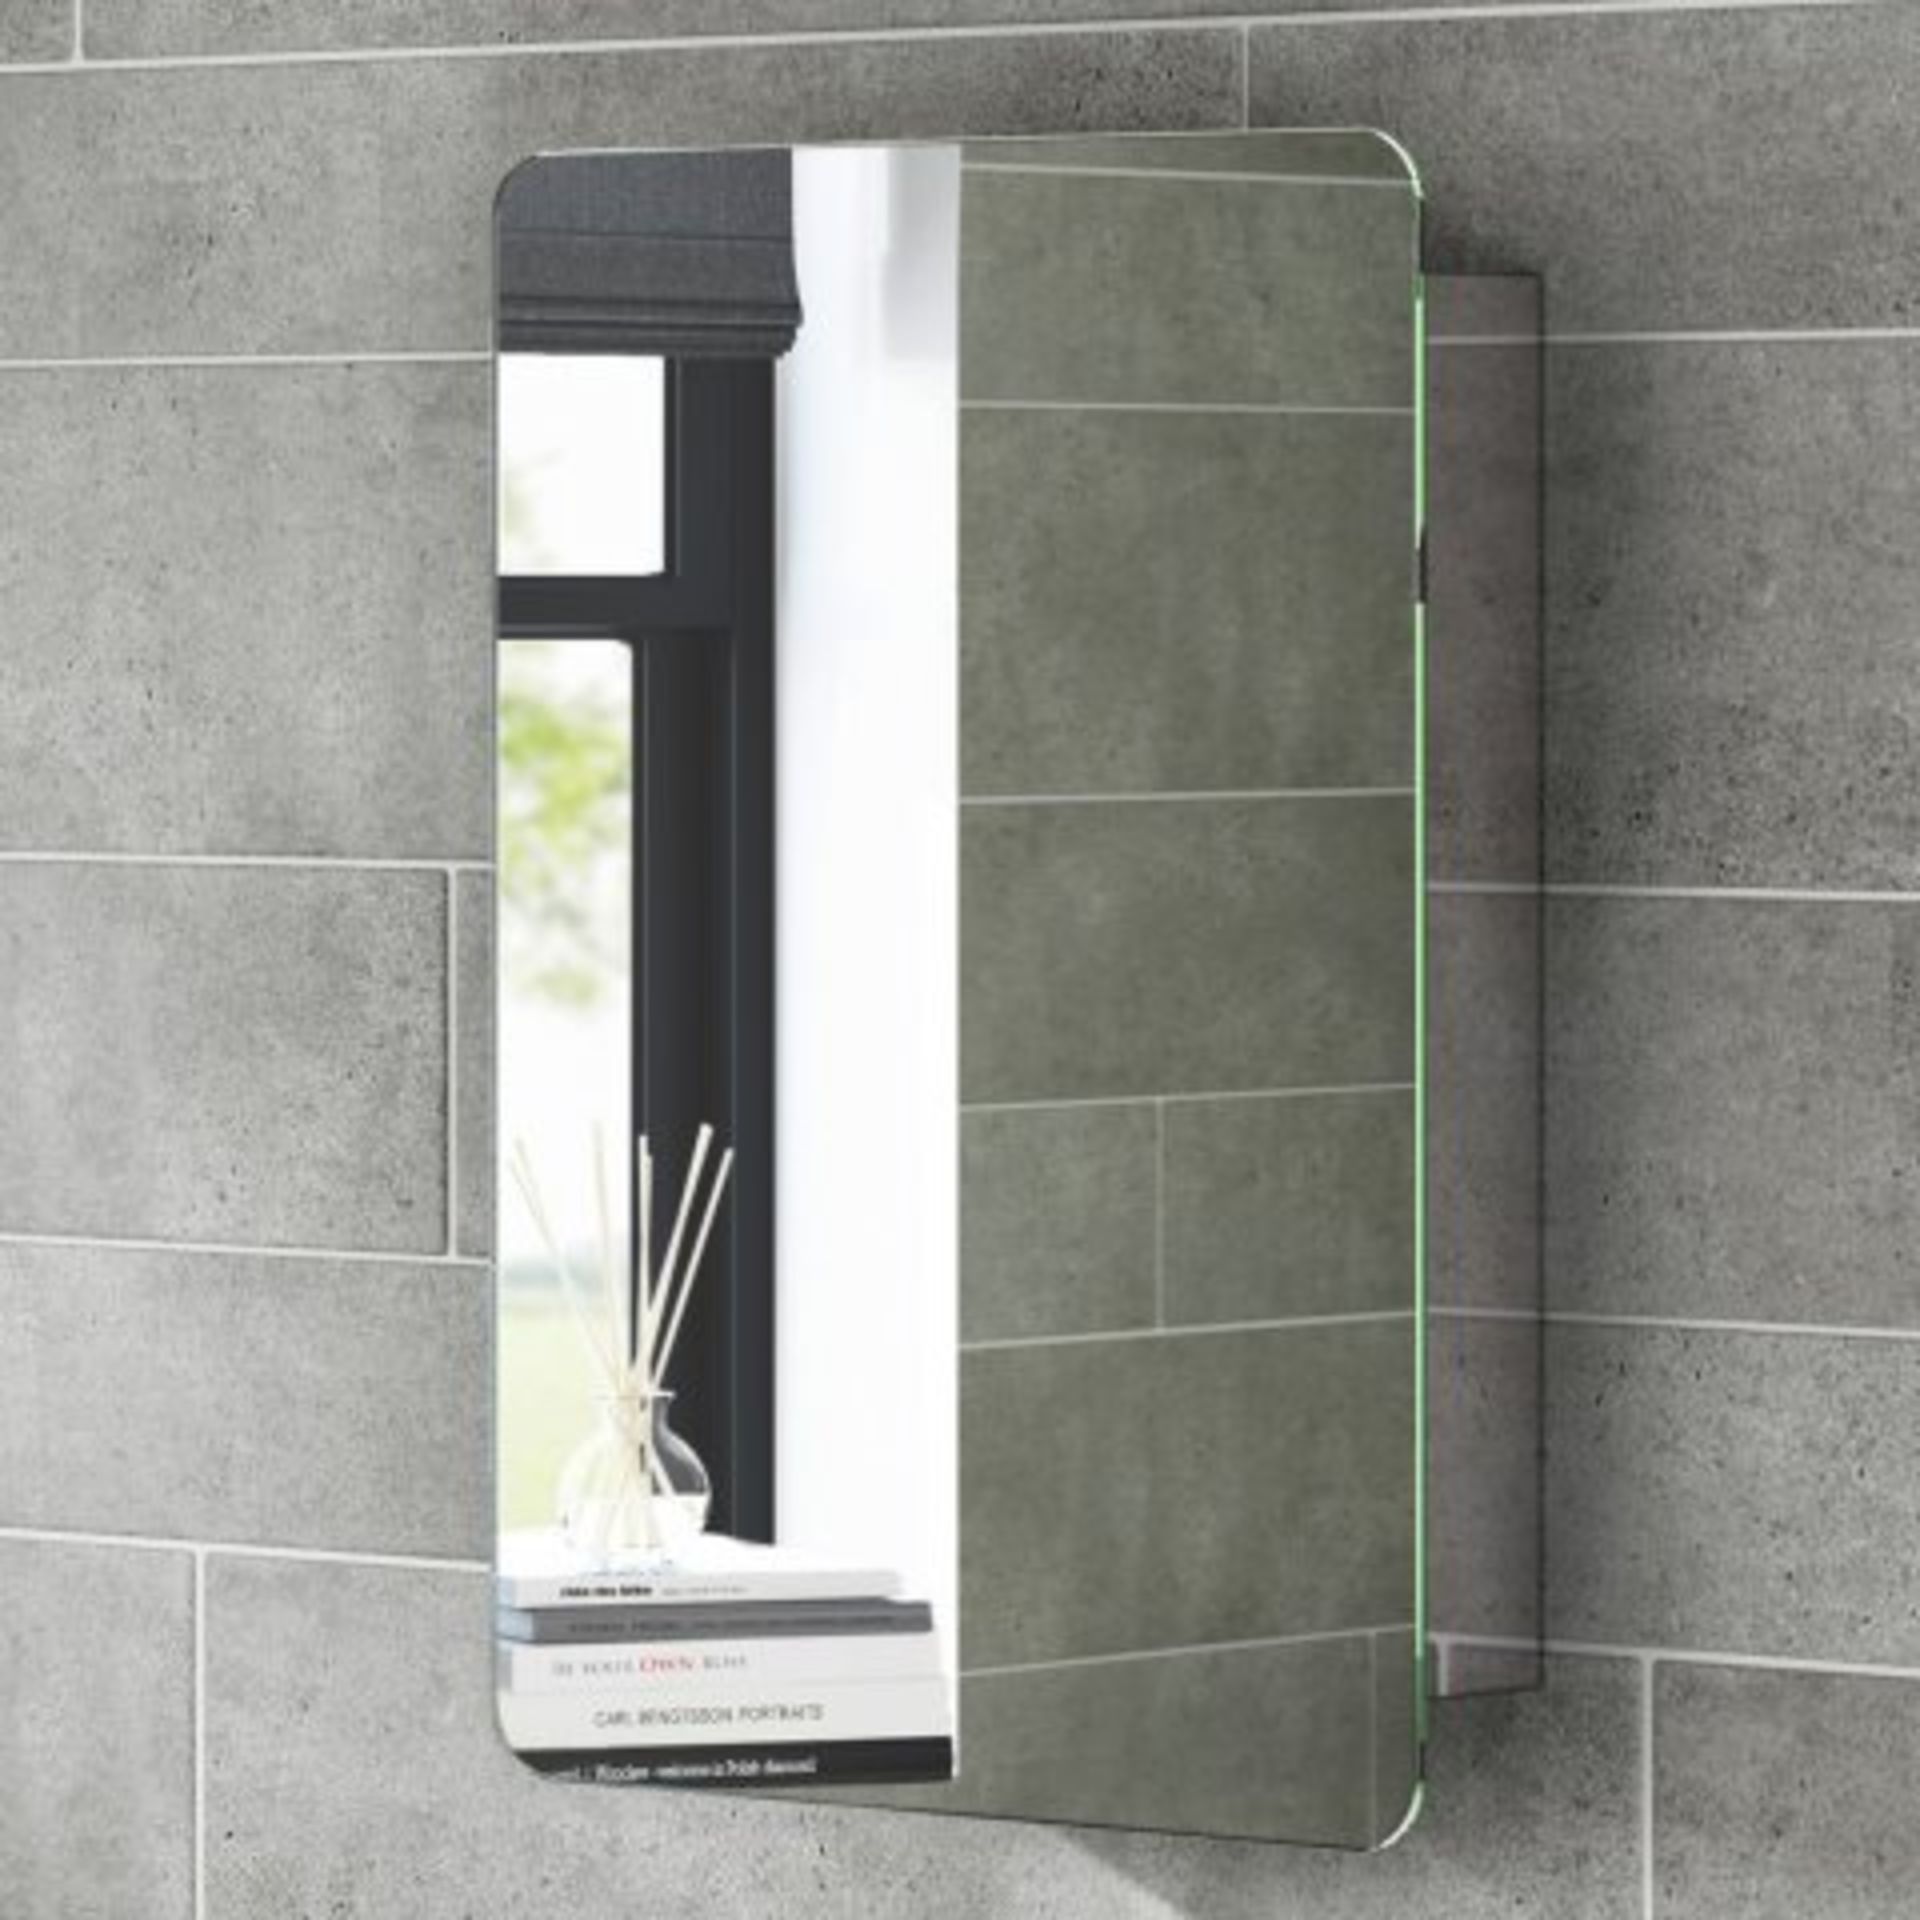 (O32) 660x460mm Liberty Stainless Steel Sliding Door Mirror Cabinet. RRP £249.99. This stunning